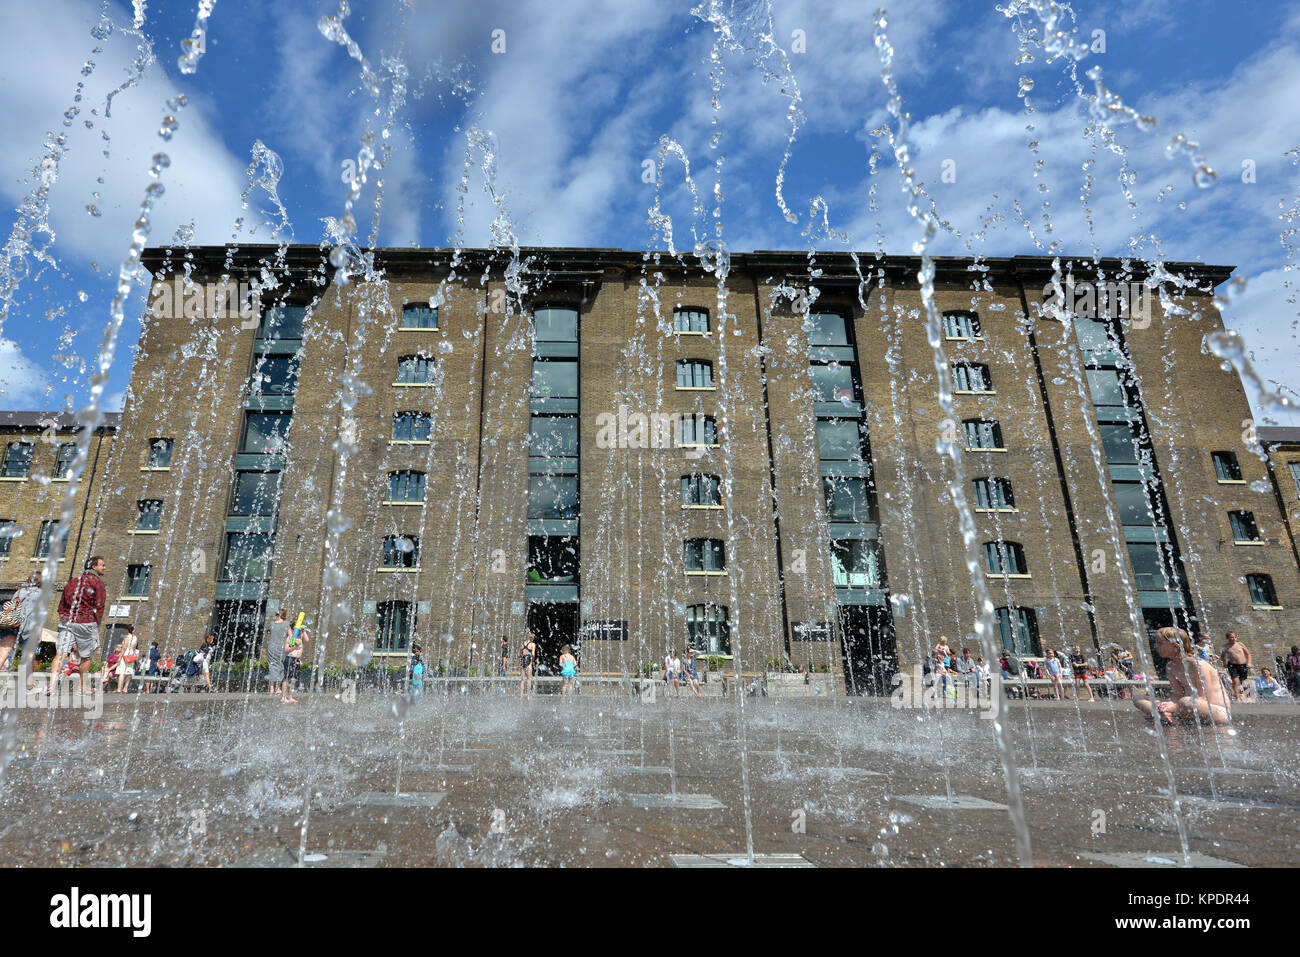 Granary Square, Camden, Kings Cross development, privately owned public space in London, UK Stock Photo